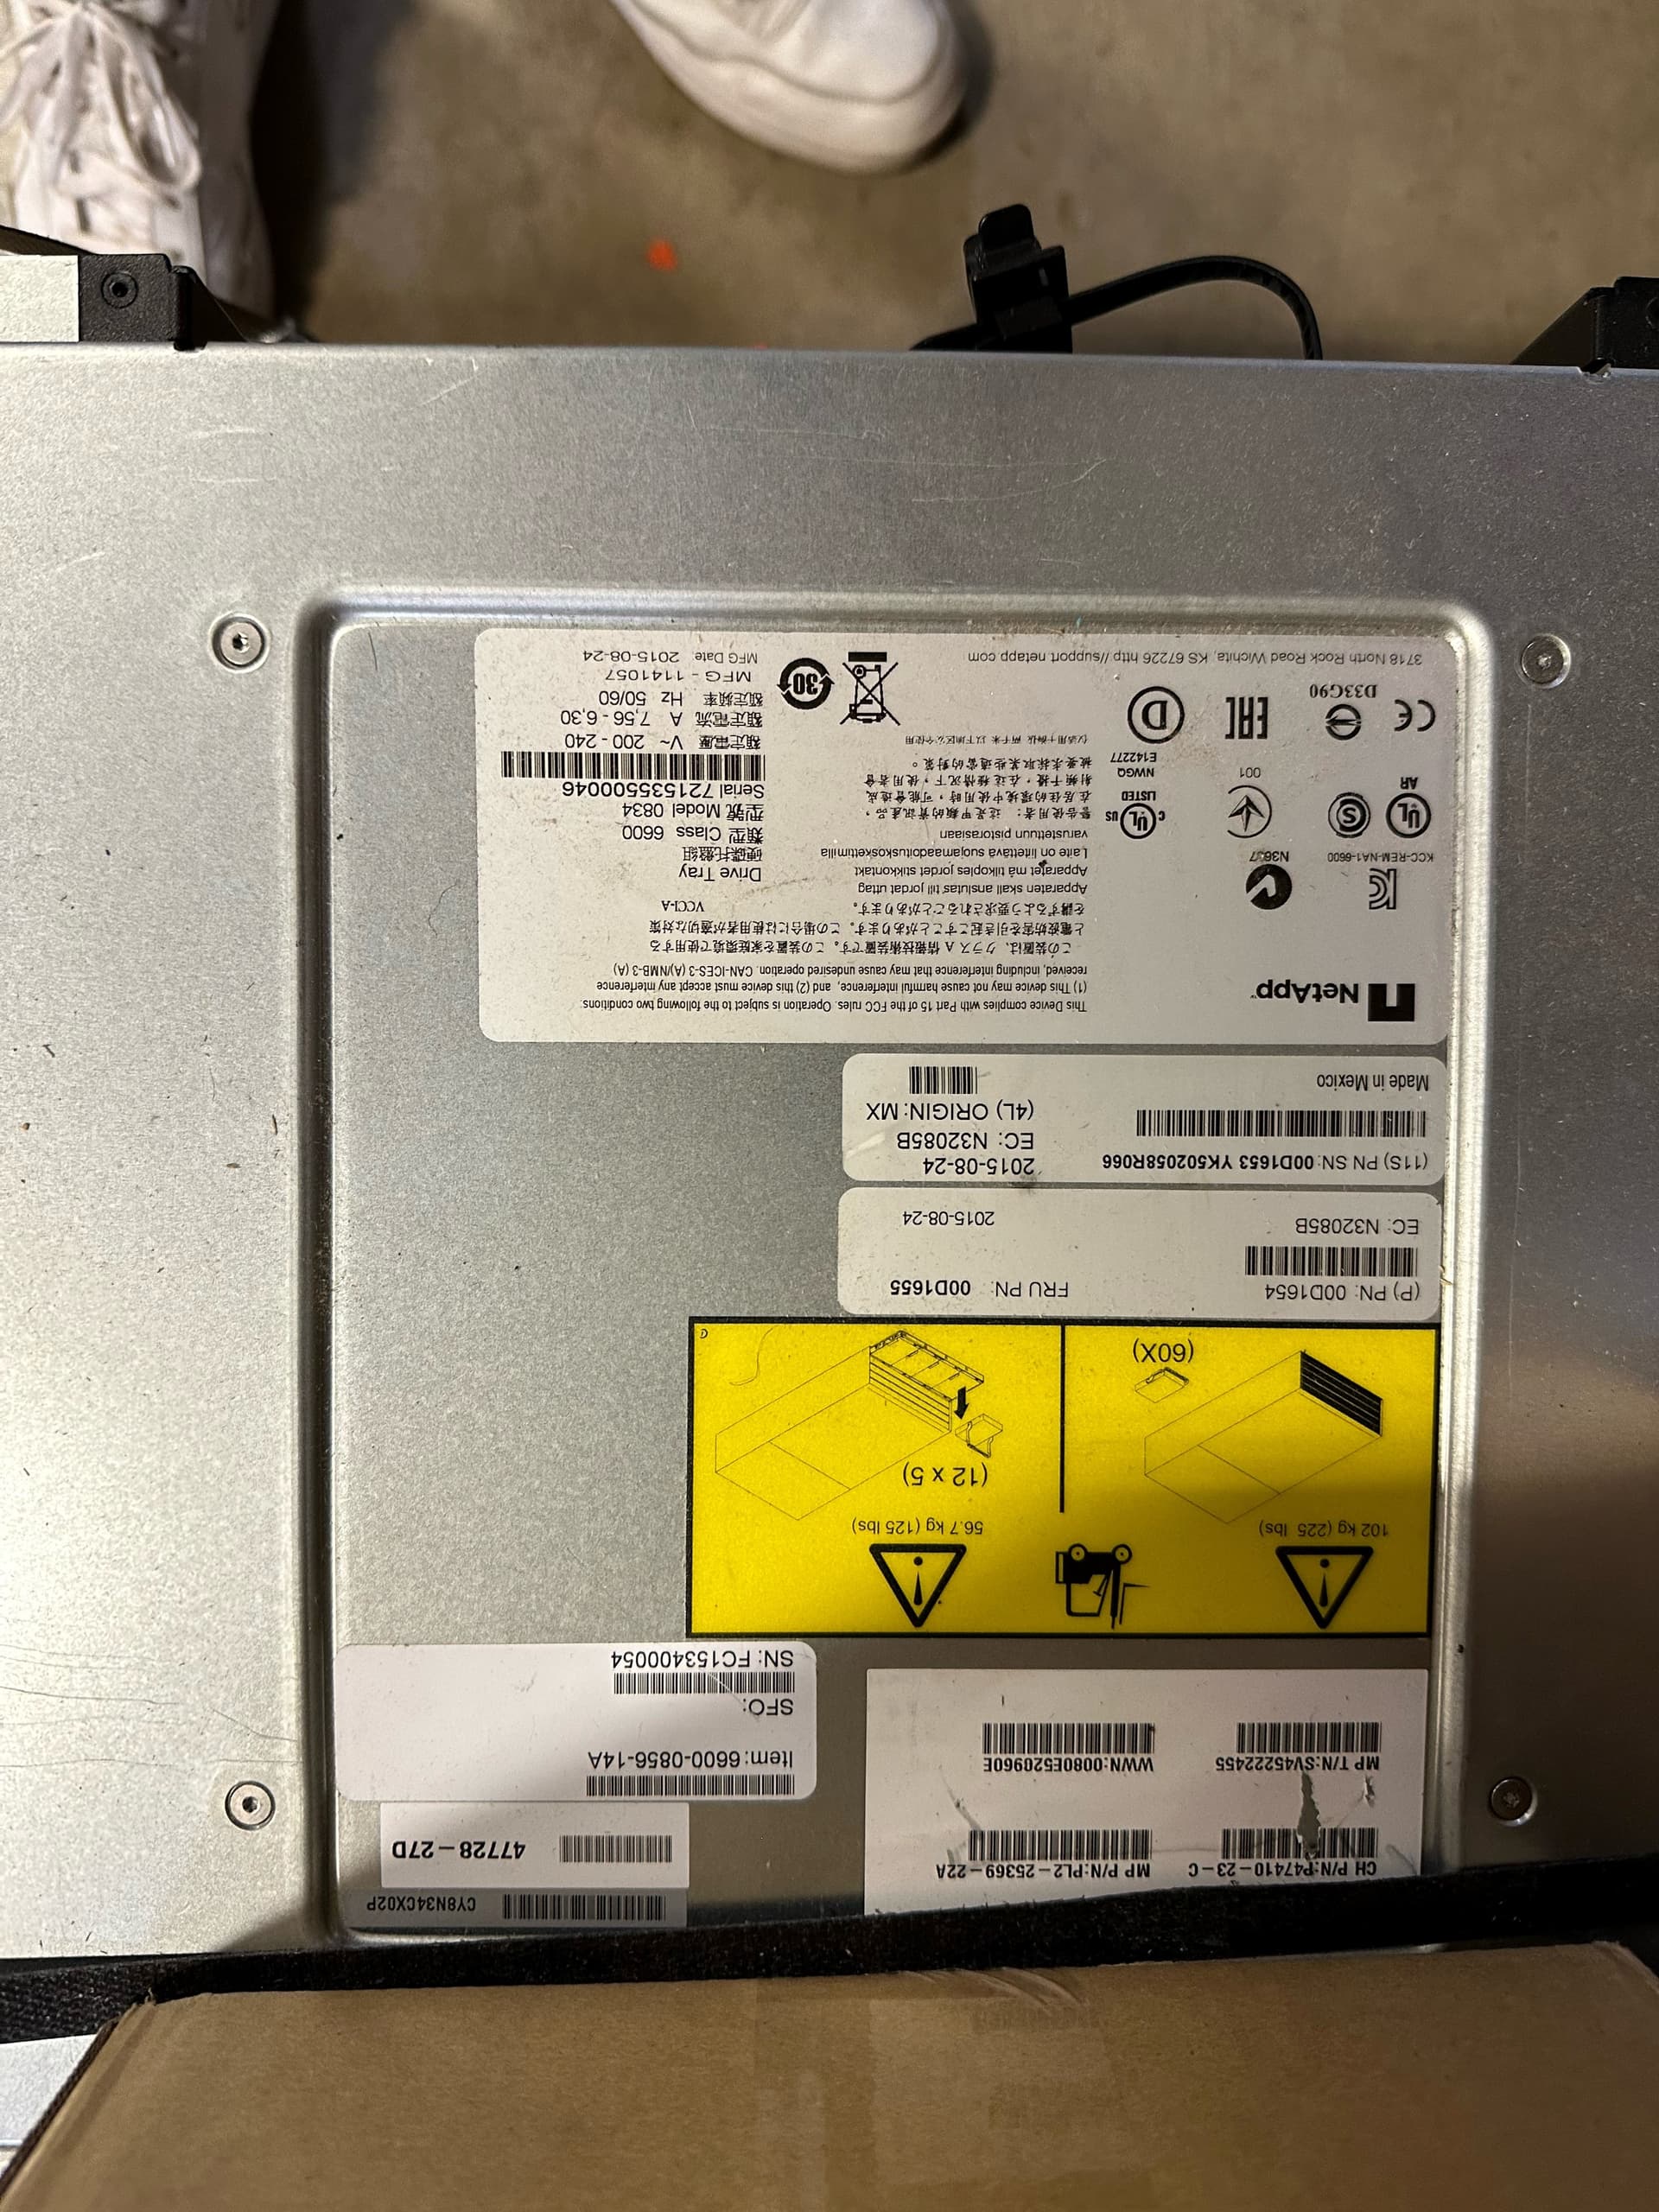 Selling JBODs loaded with HDDs - Buy/Sell/Trade - Chia Forum